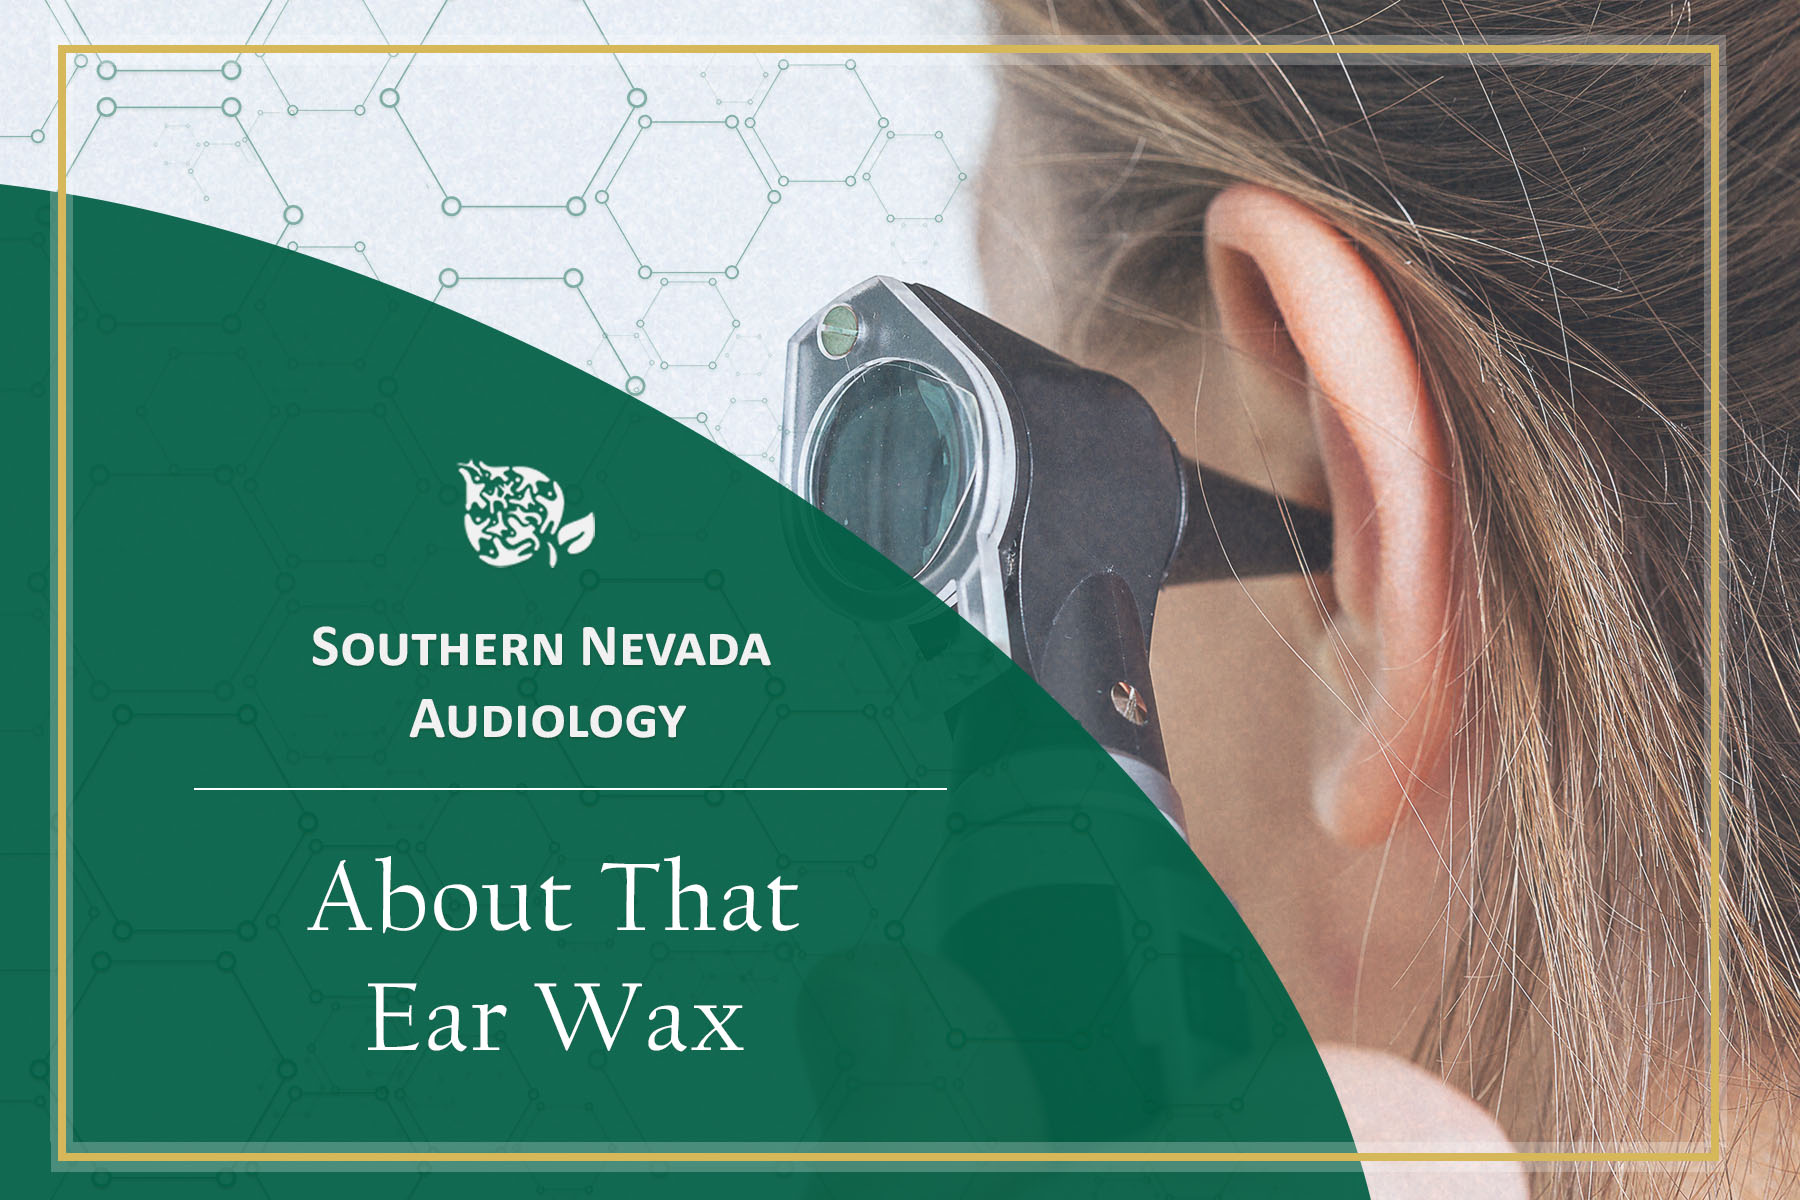 About That Ear Wax